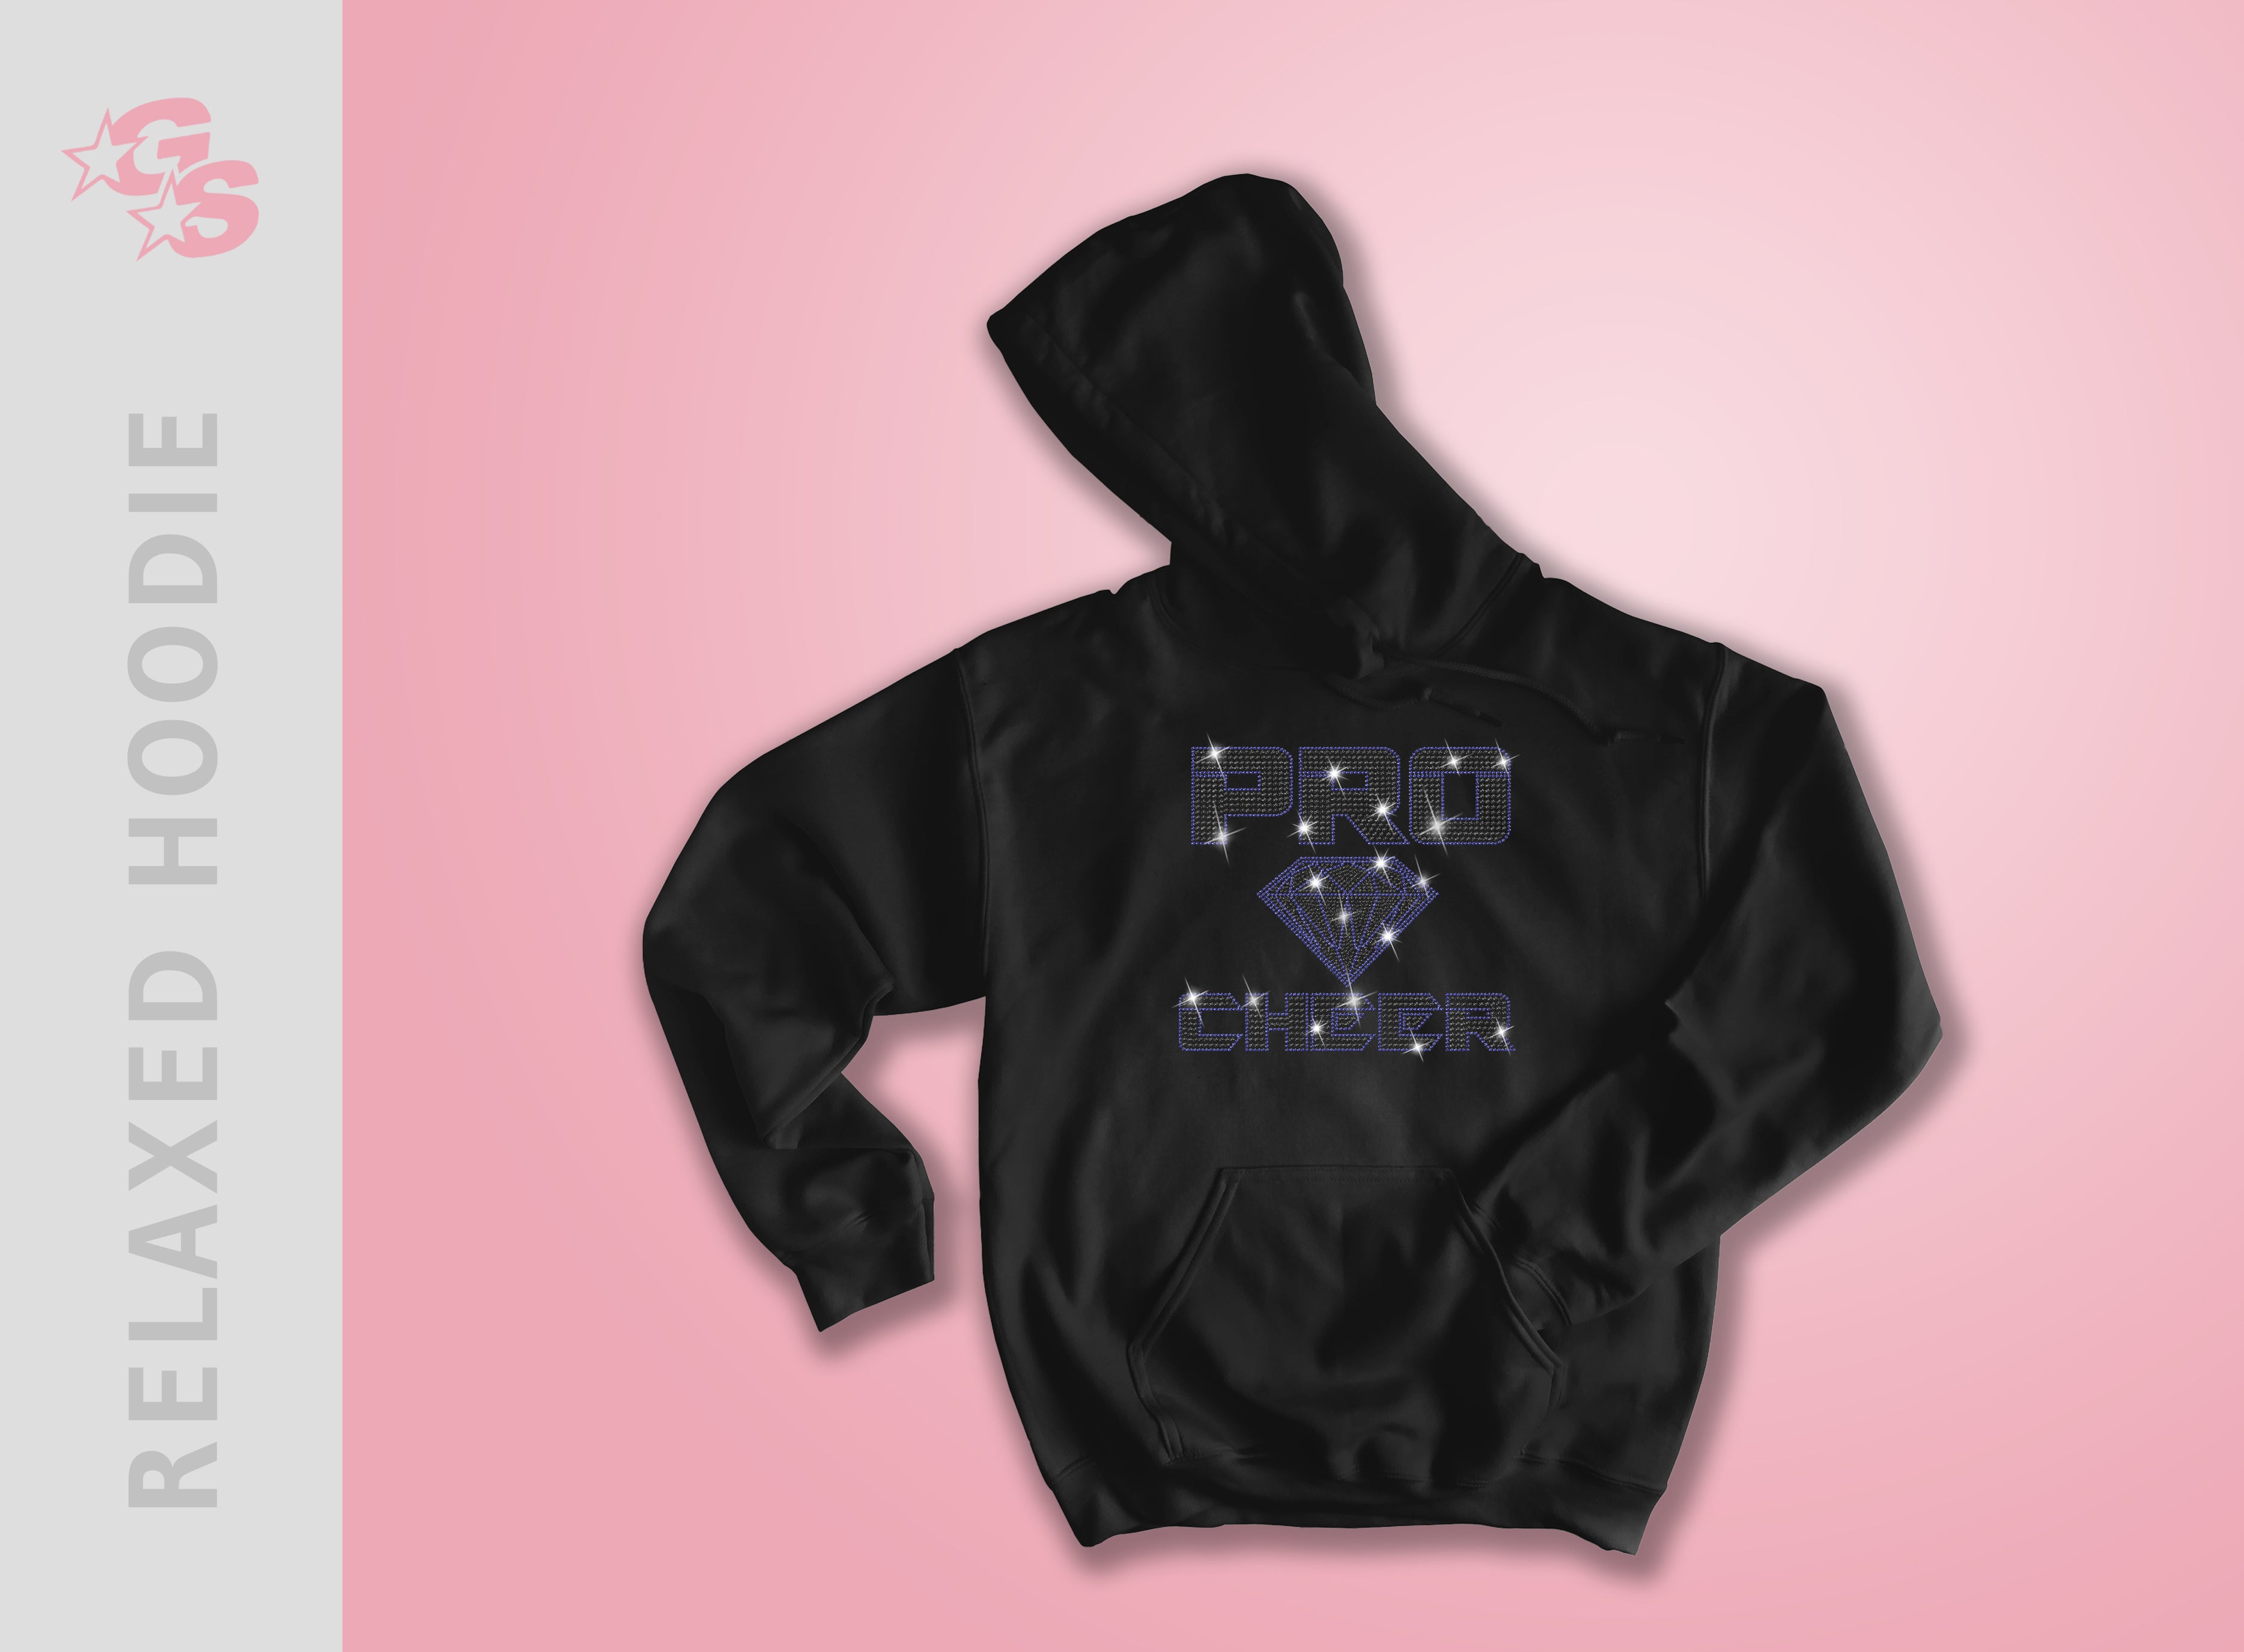 Pro Cheer Relaxed Hoodie - black bling logo